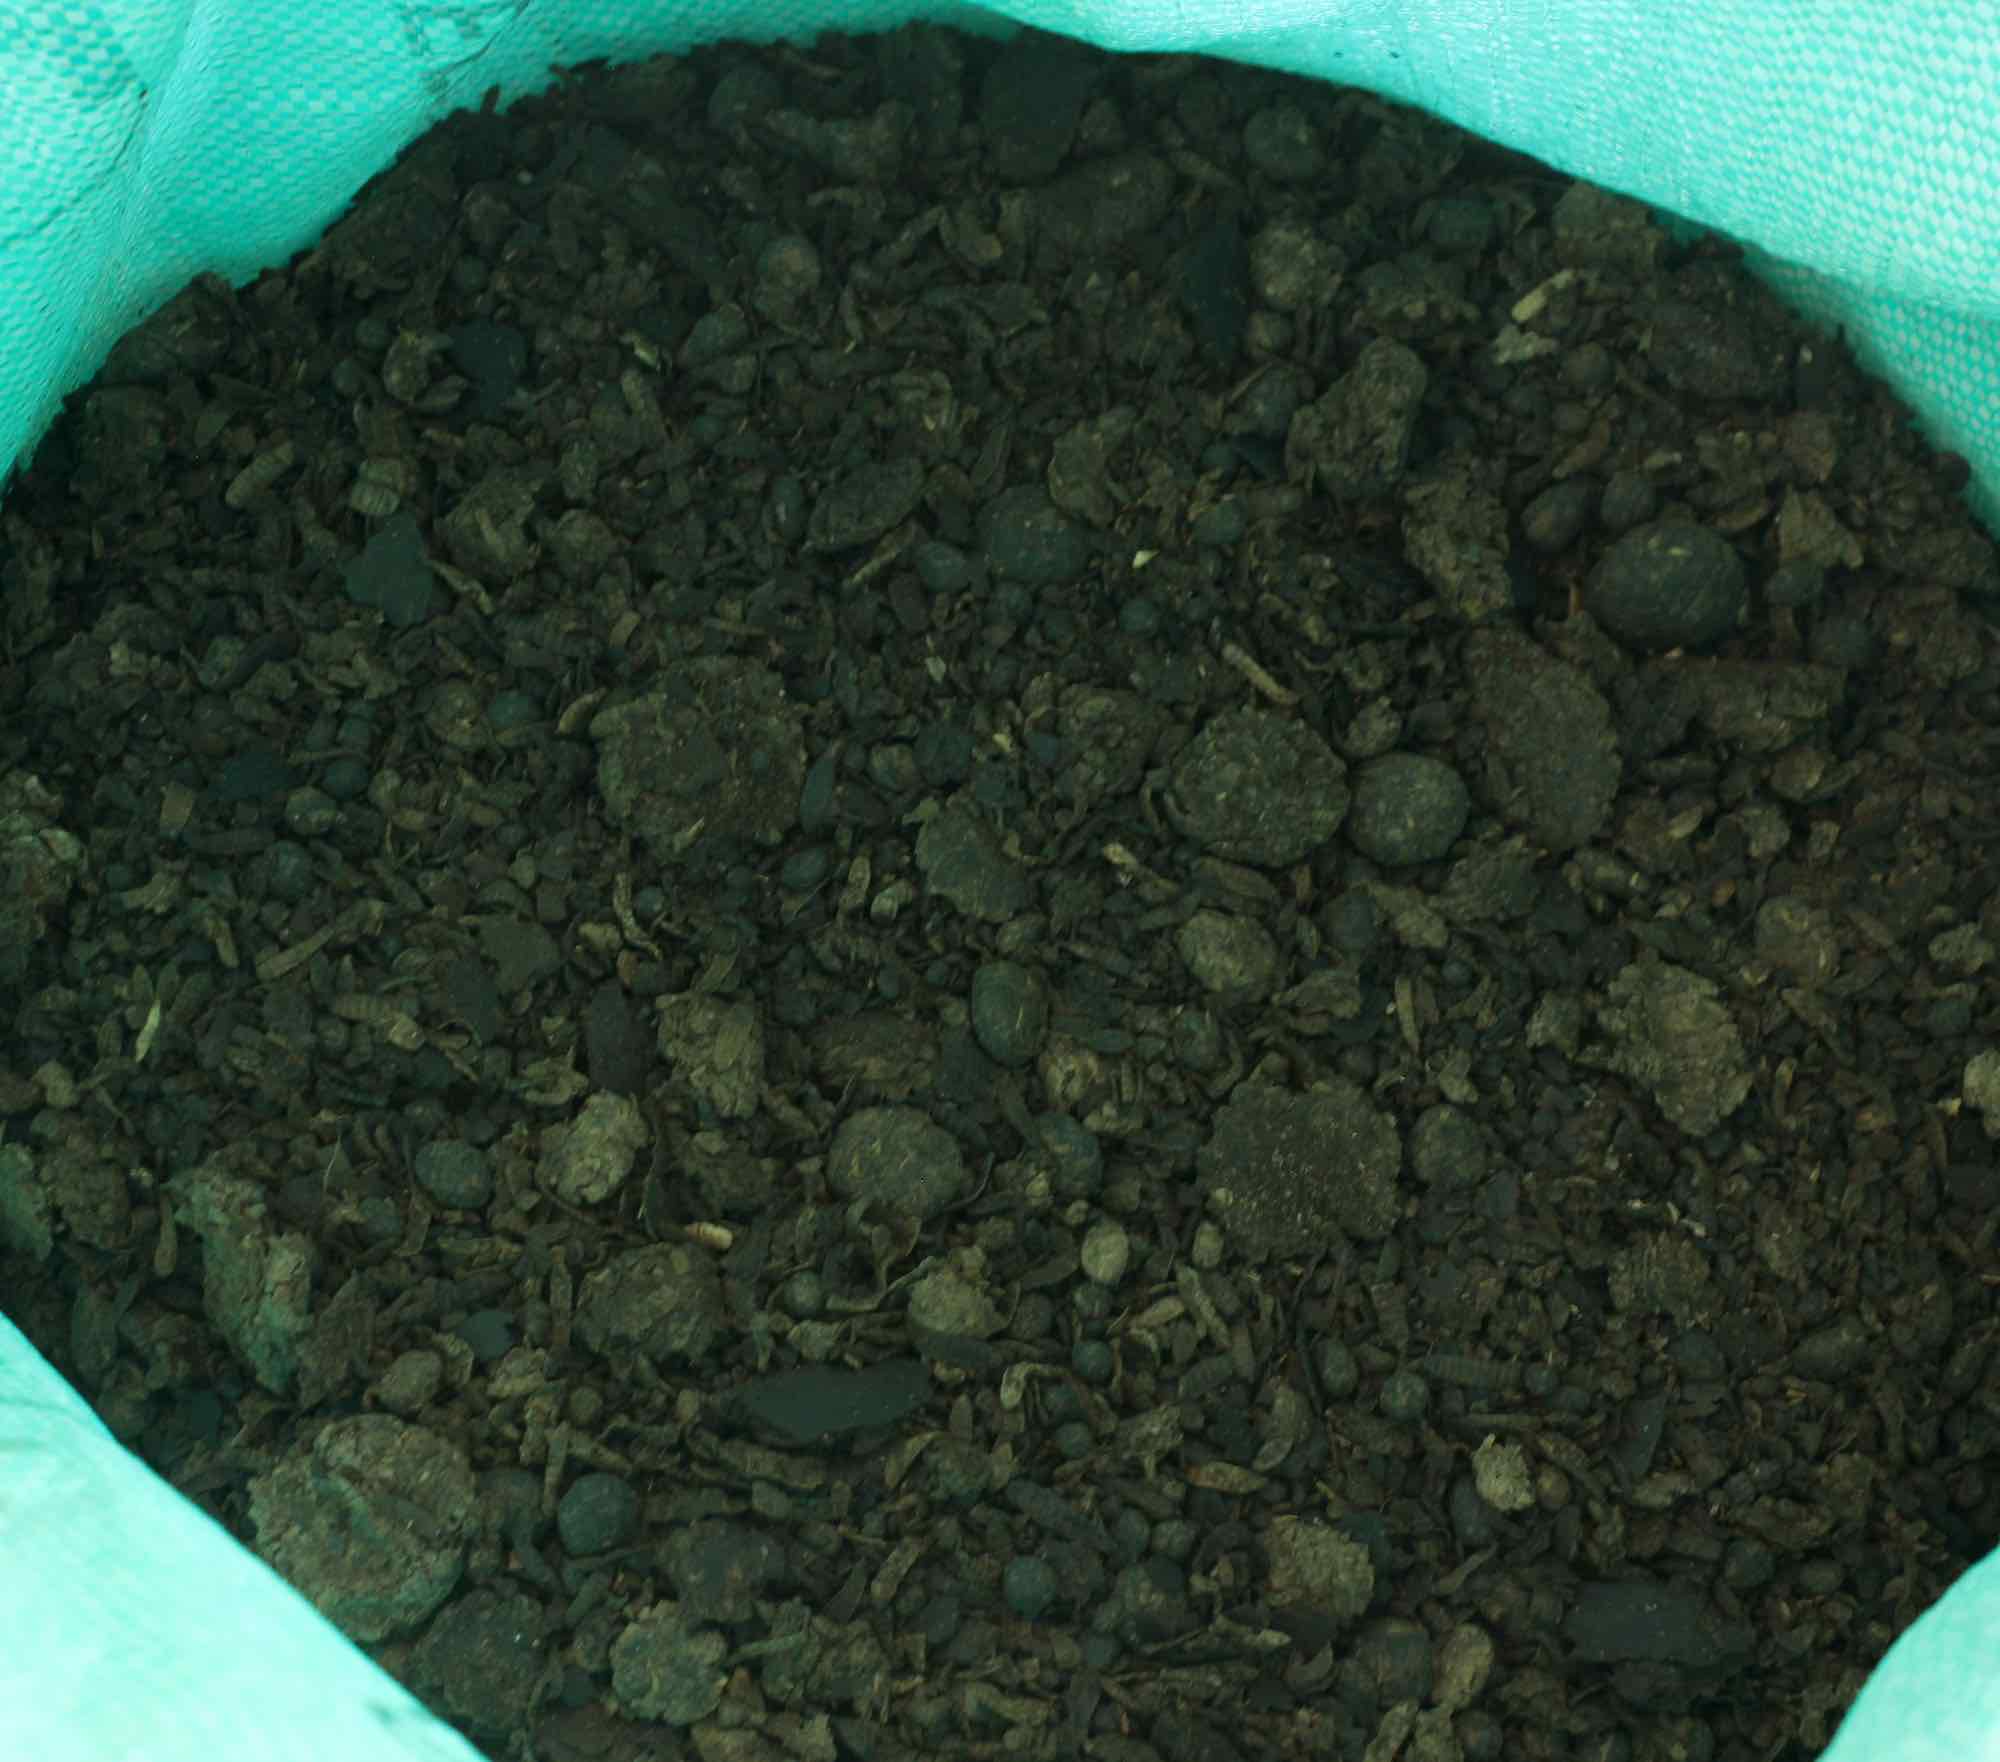 A green container containing dark earth-like material.